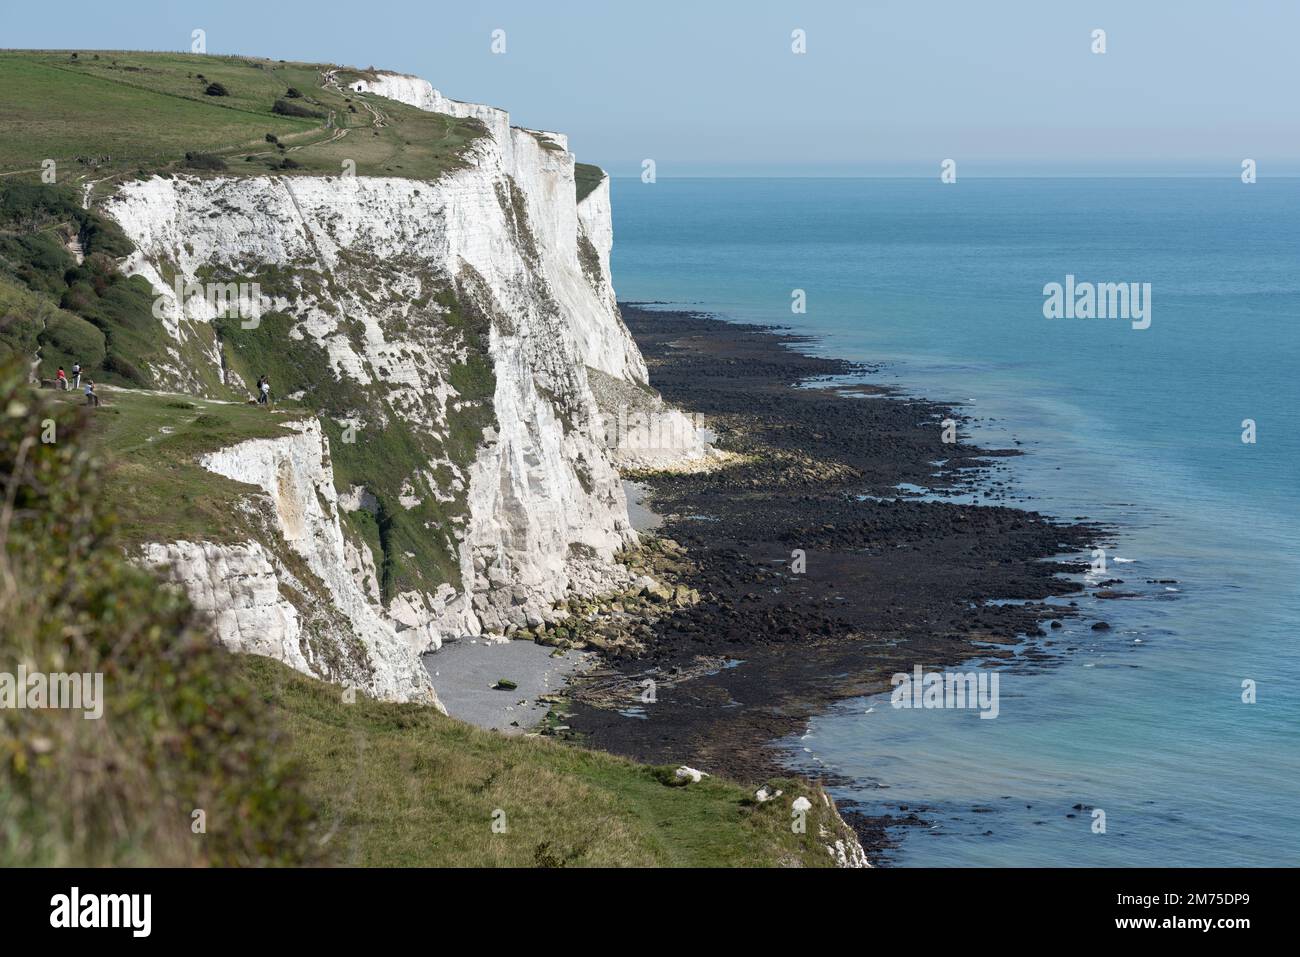 The White Cliffs of Dover, England. Stock Photo